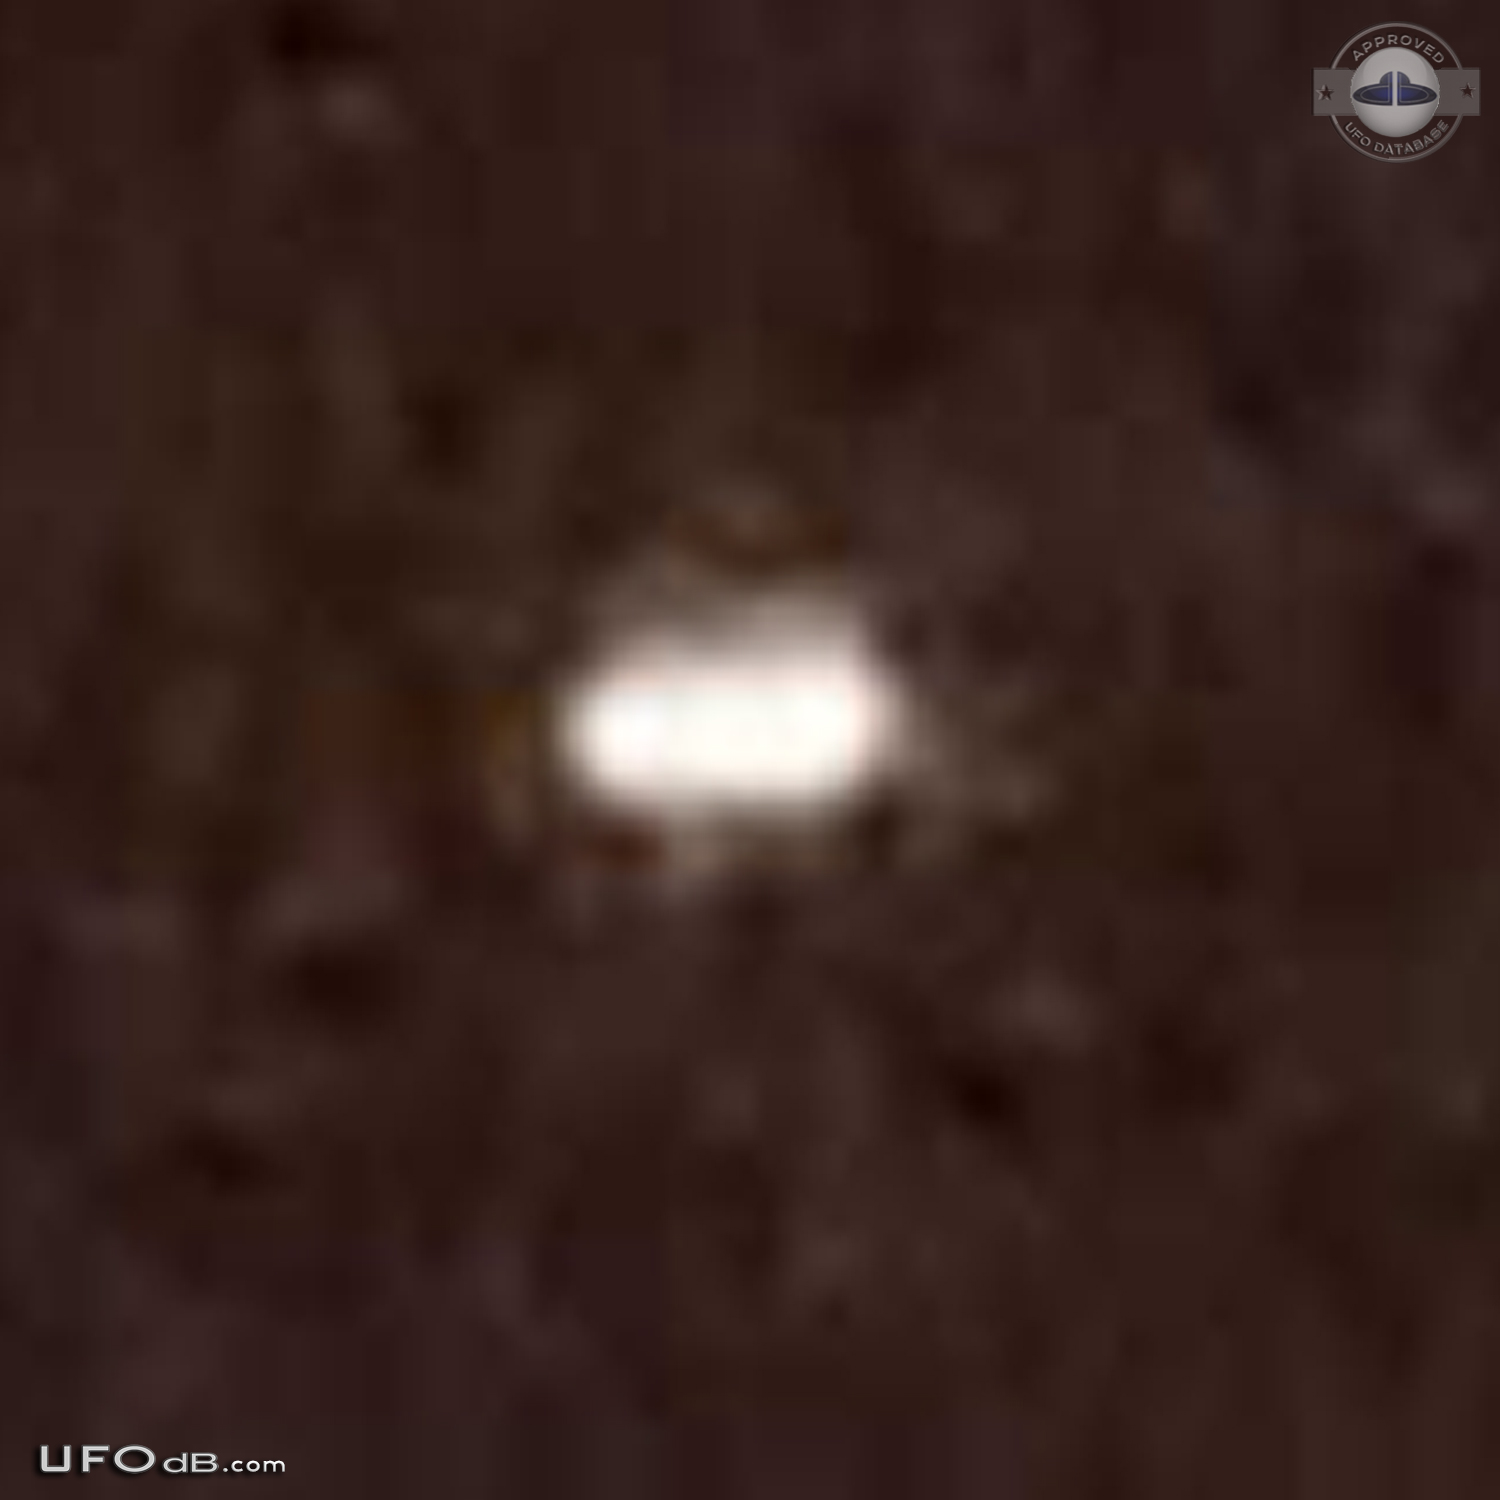 Sphere UFOs appear beside Fireworks during Diwali in New Delhi - 2011 UFO Picture #475-6